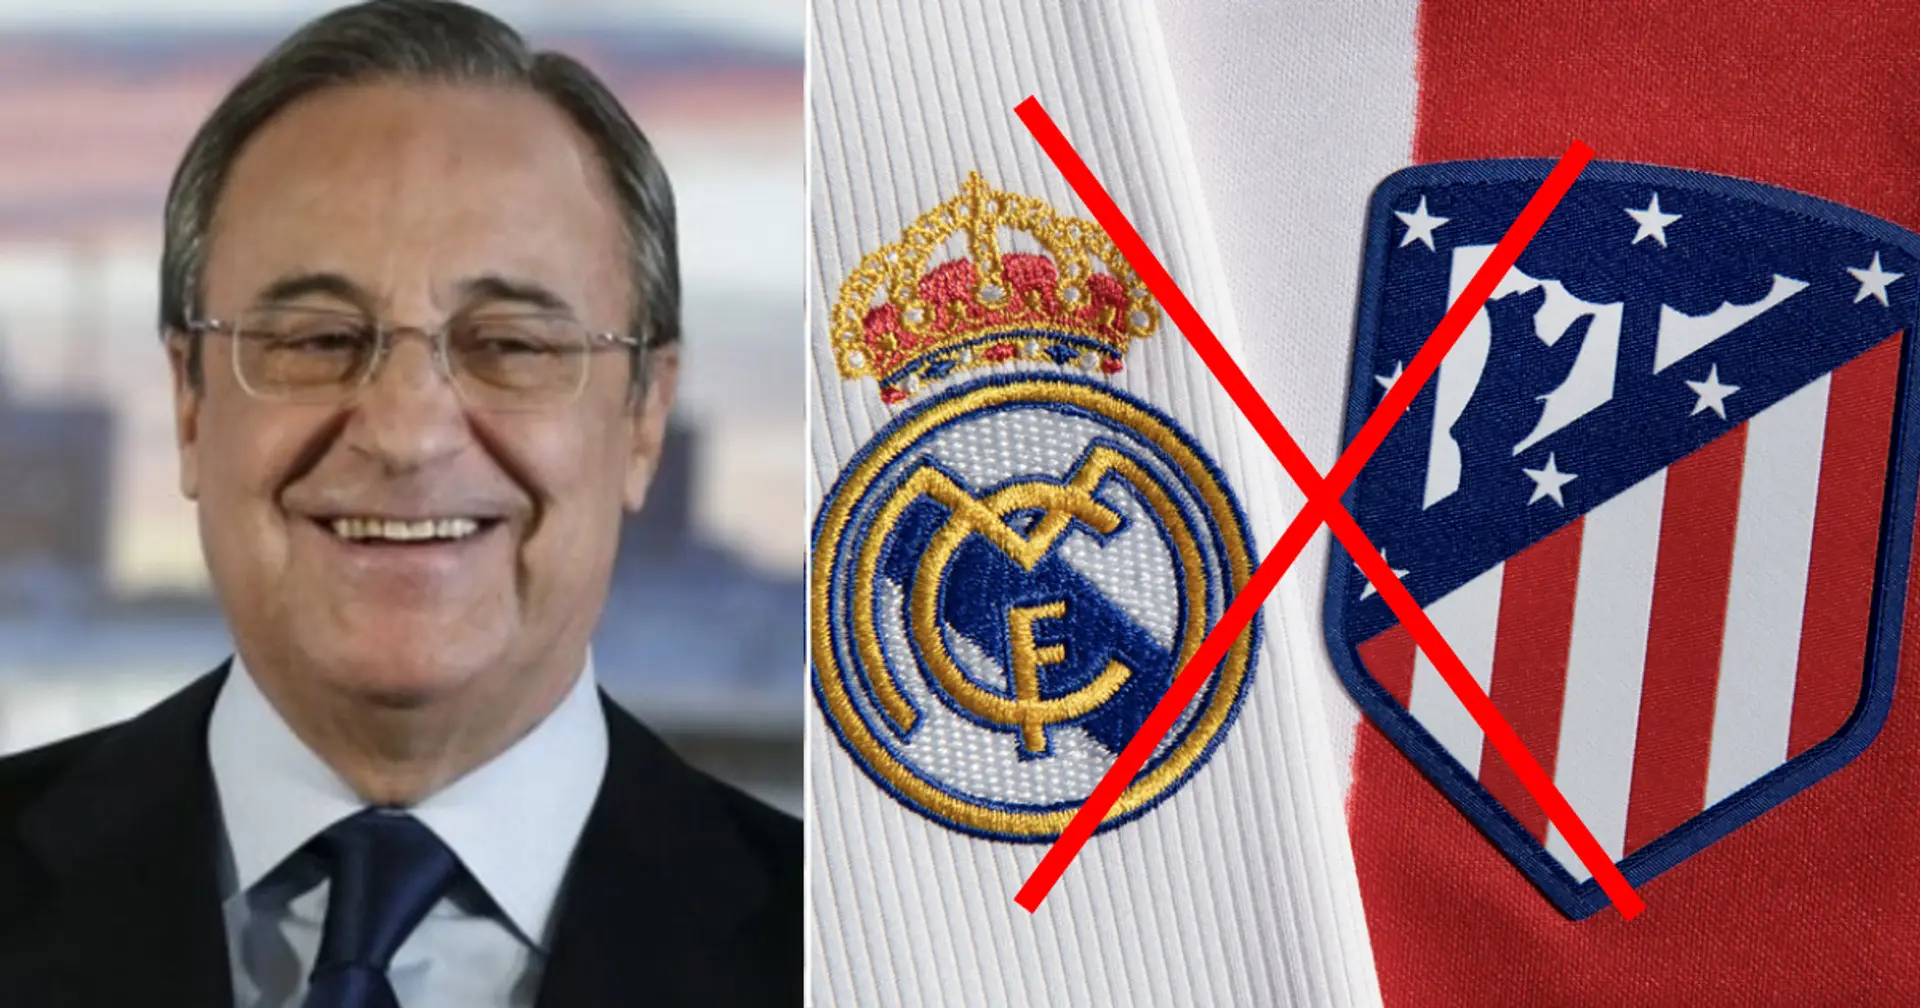 Real Madrid sign up to 6 homegrown Atletico Madrid players amid breaking 'non-aggression pact'